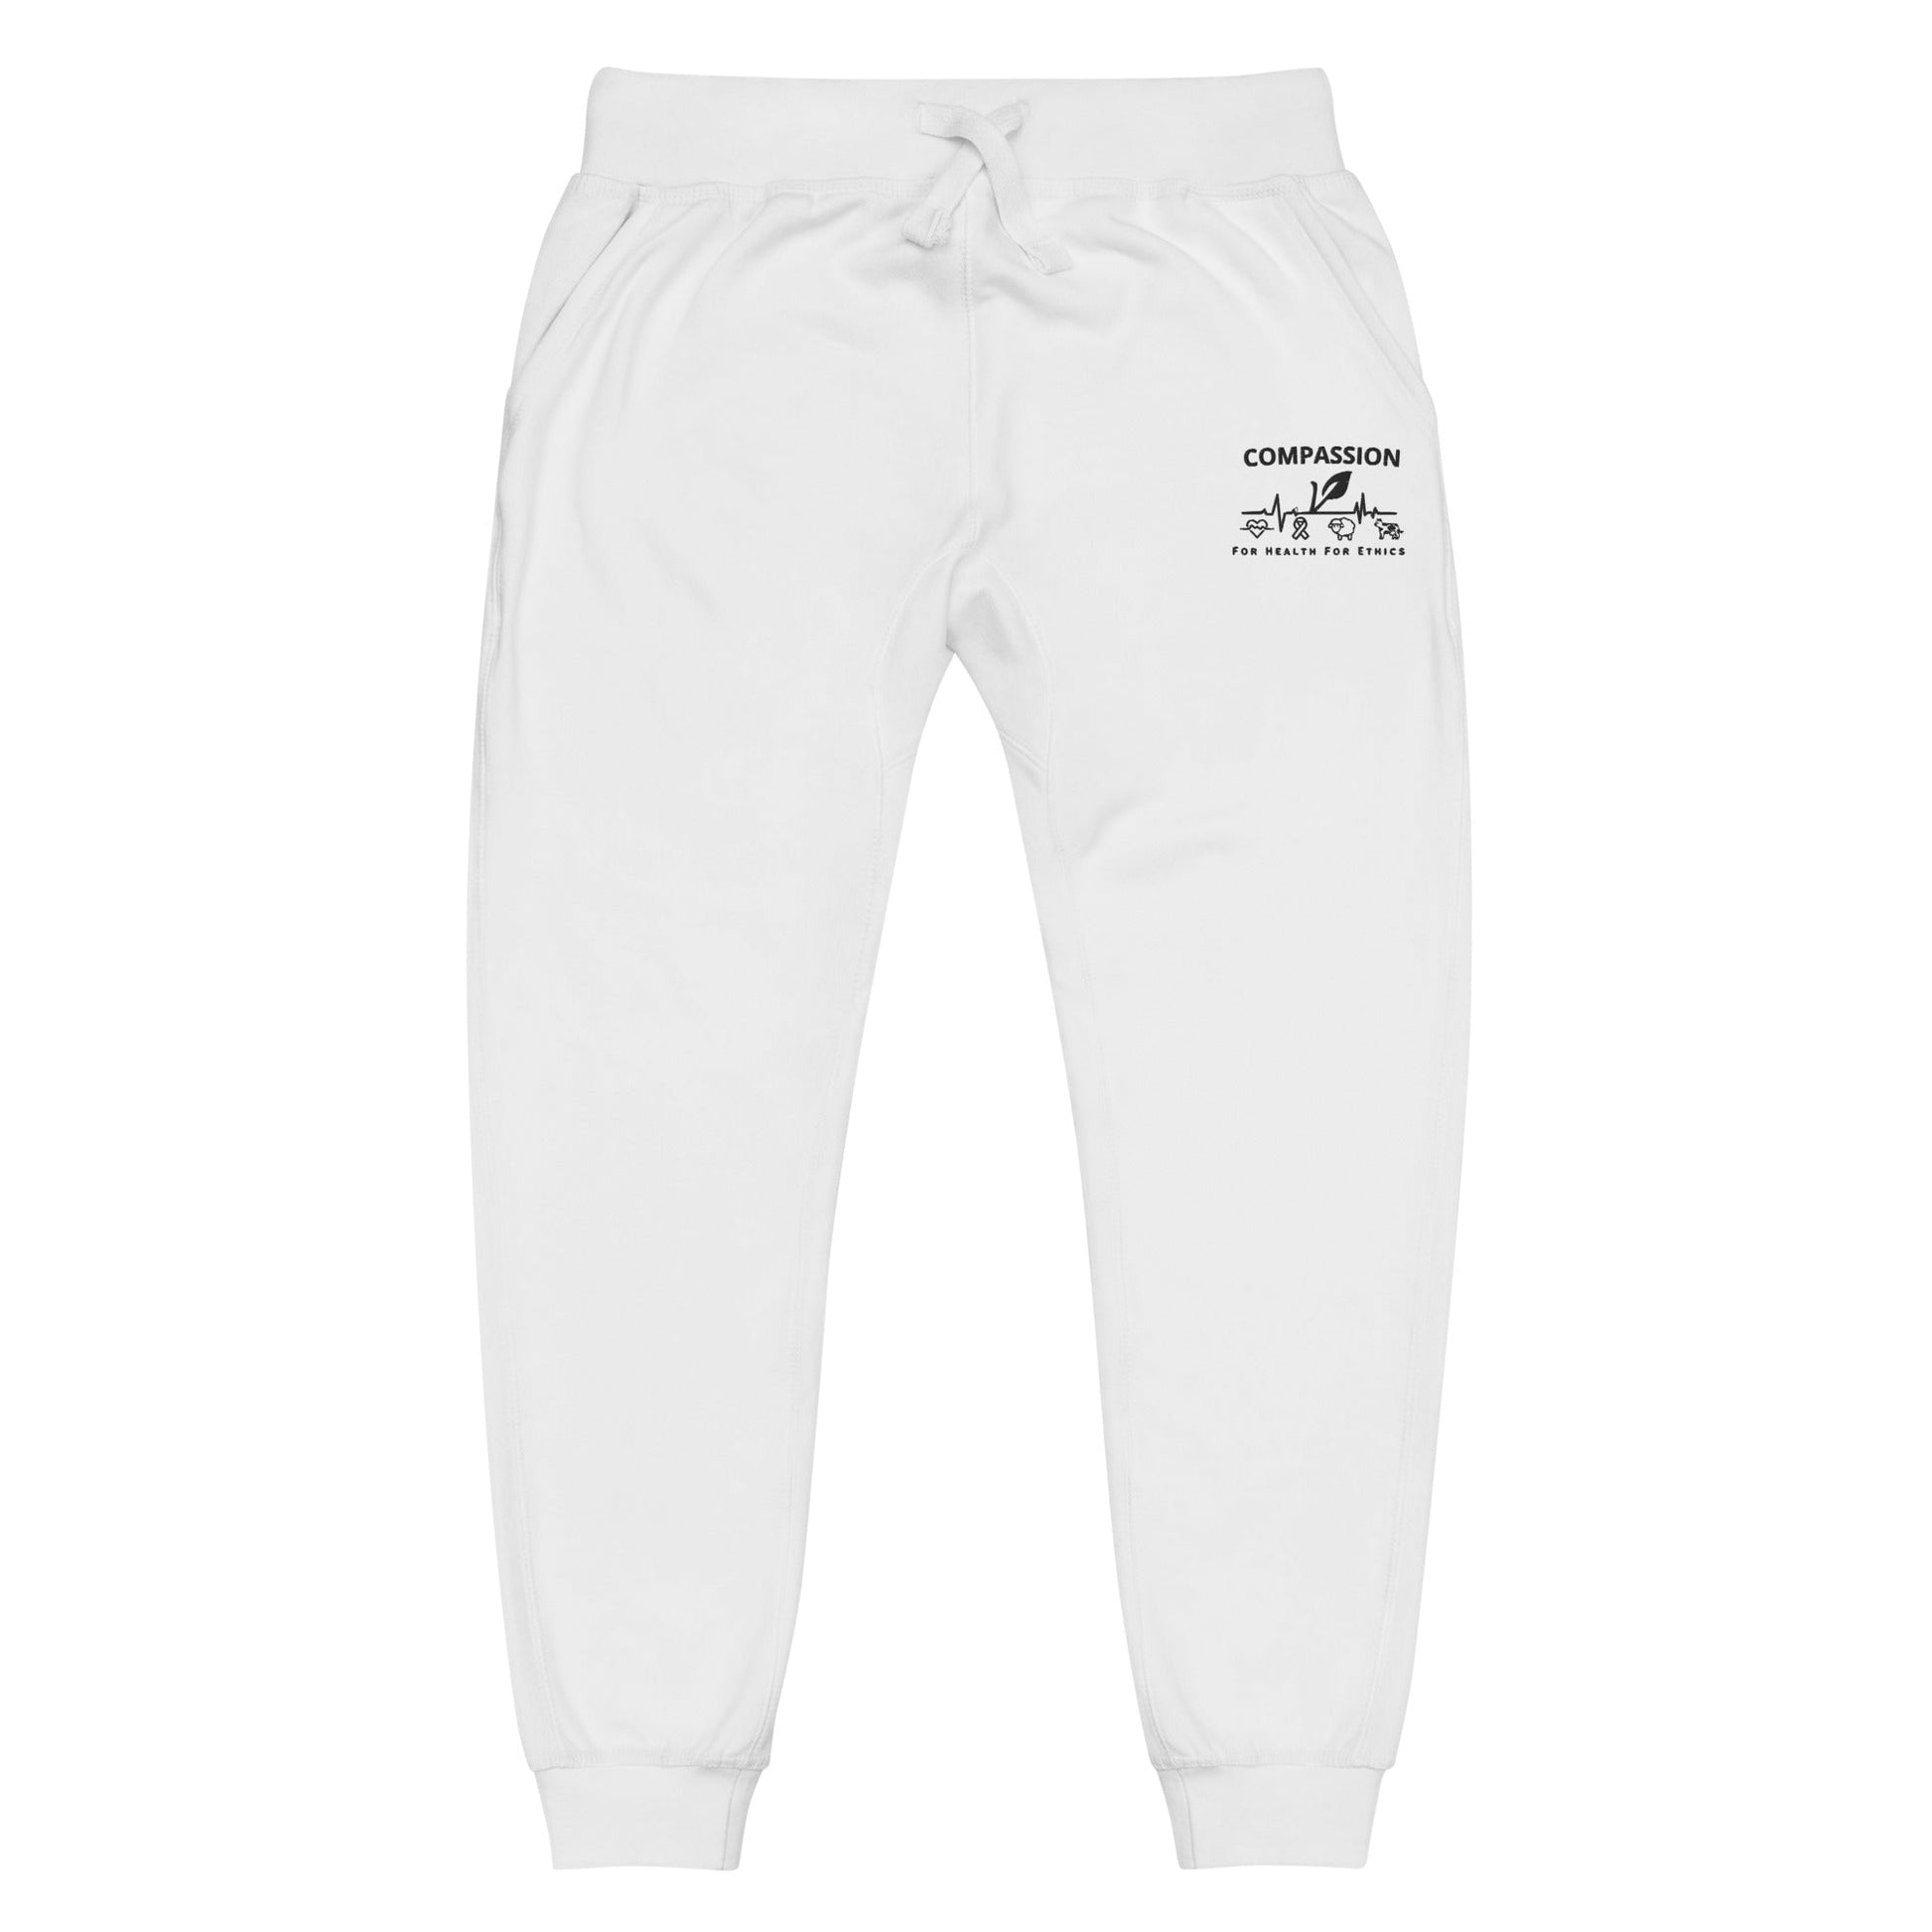 Compassion Fleece sweatpants - For Health For Ethics - White